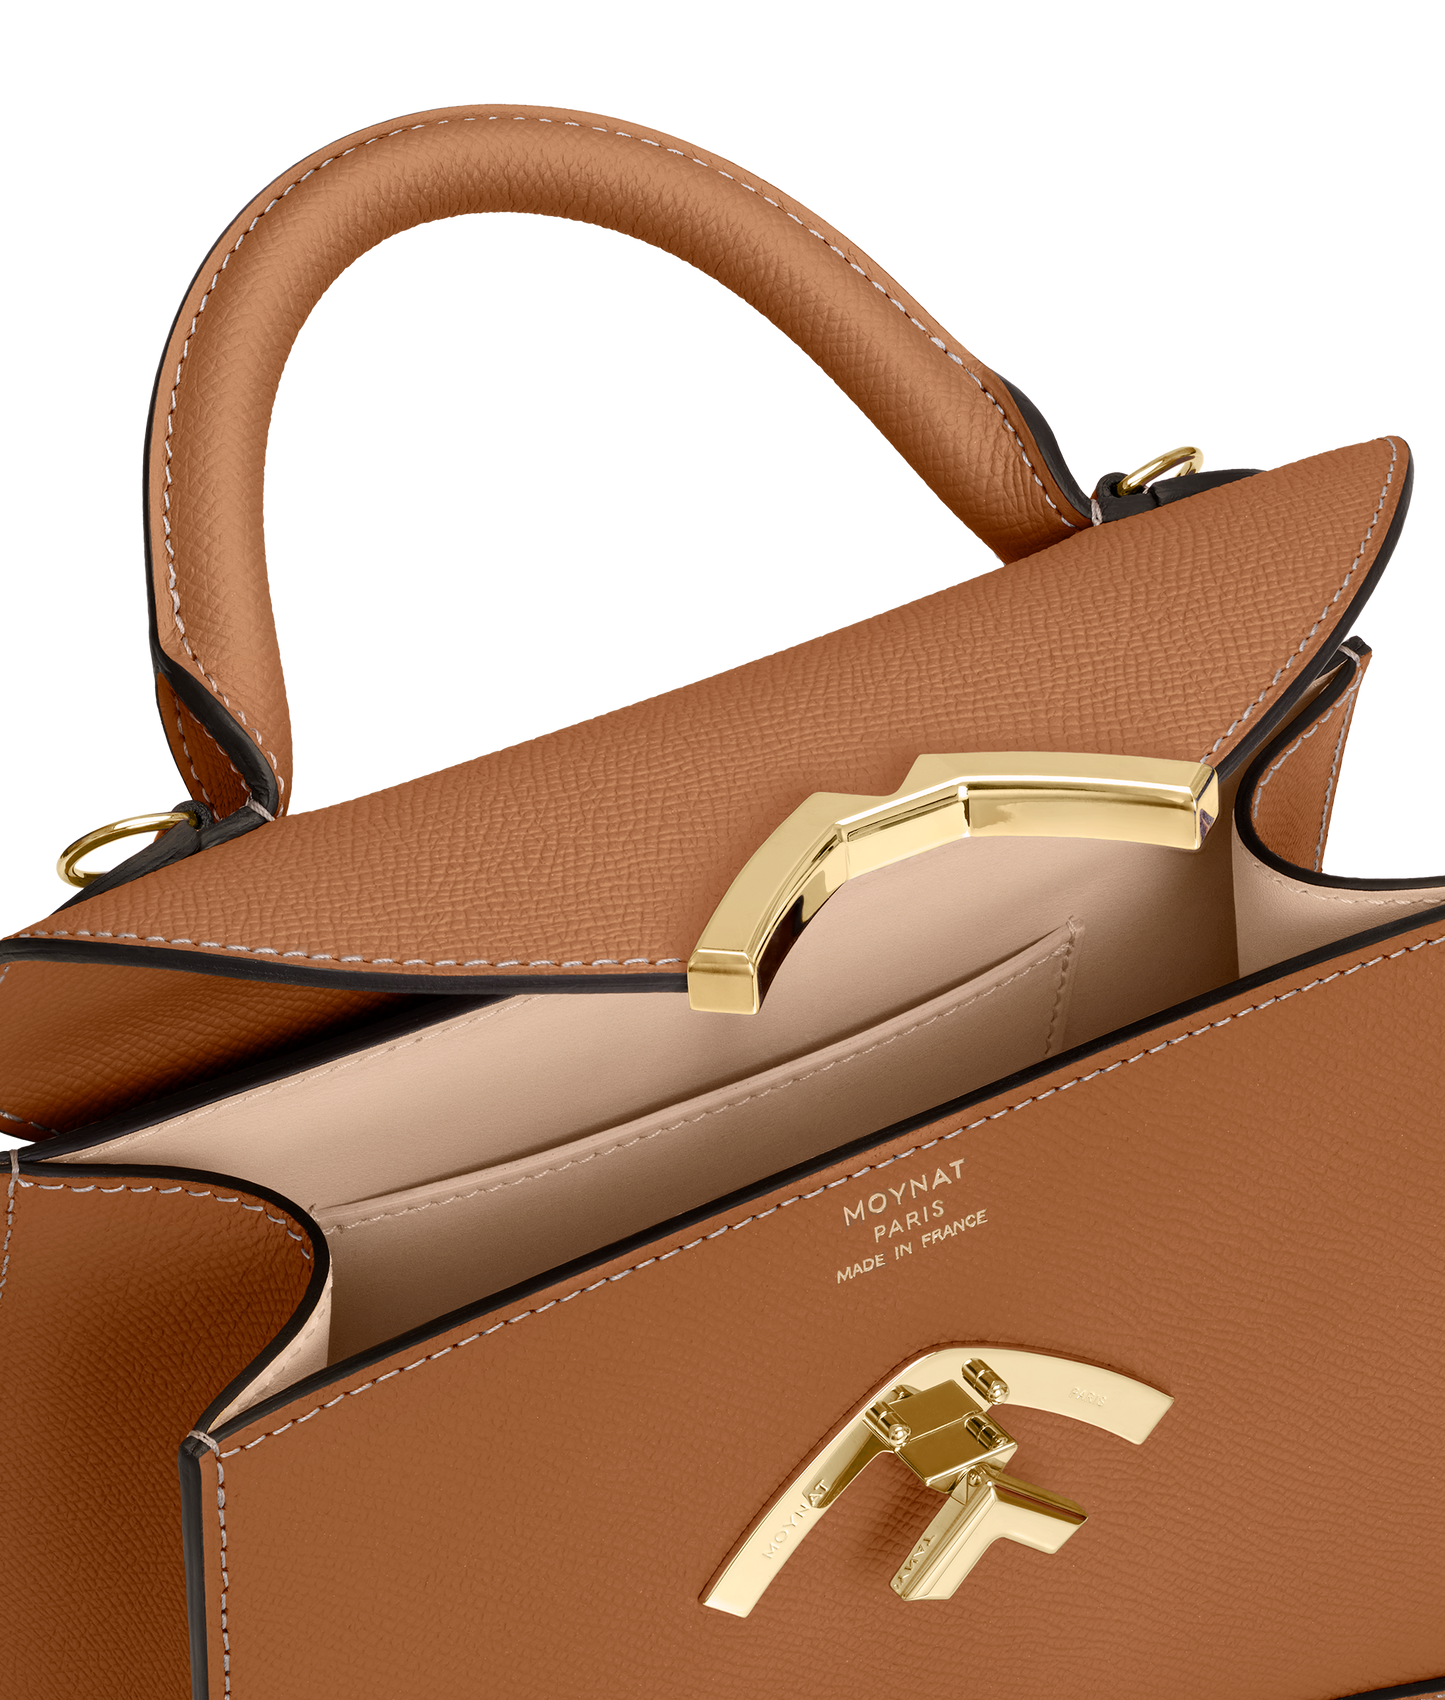 moynat's Gabrielle BB in canvas and leather takes over 20 hours to